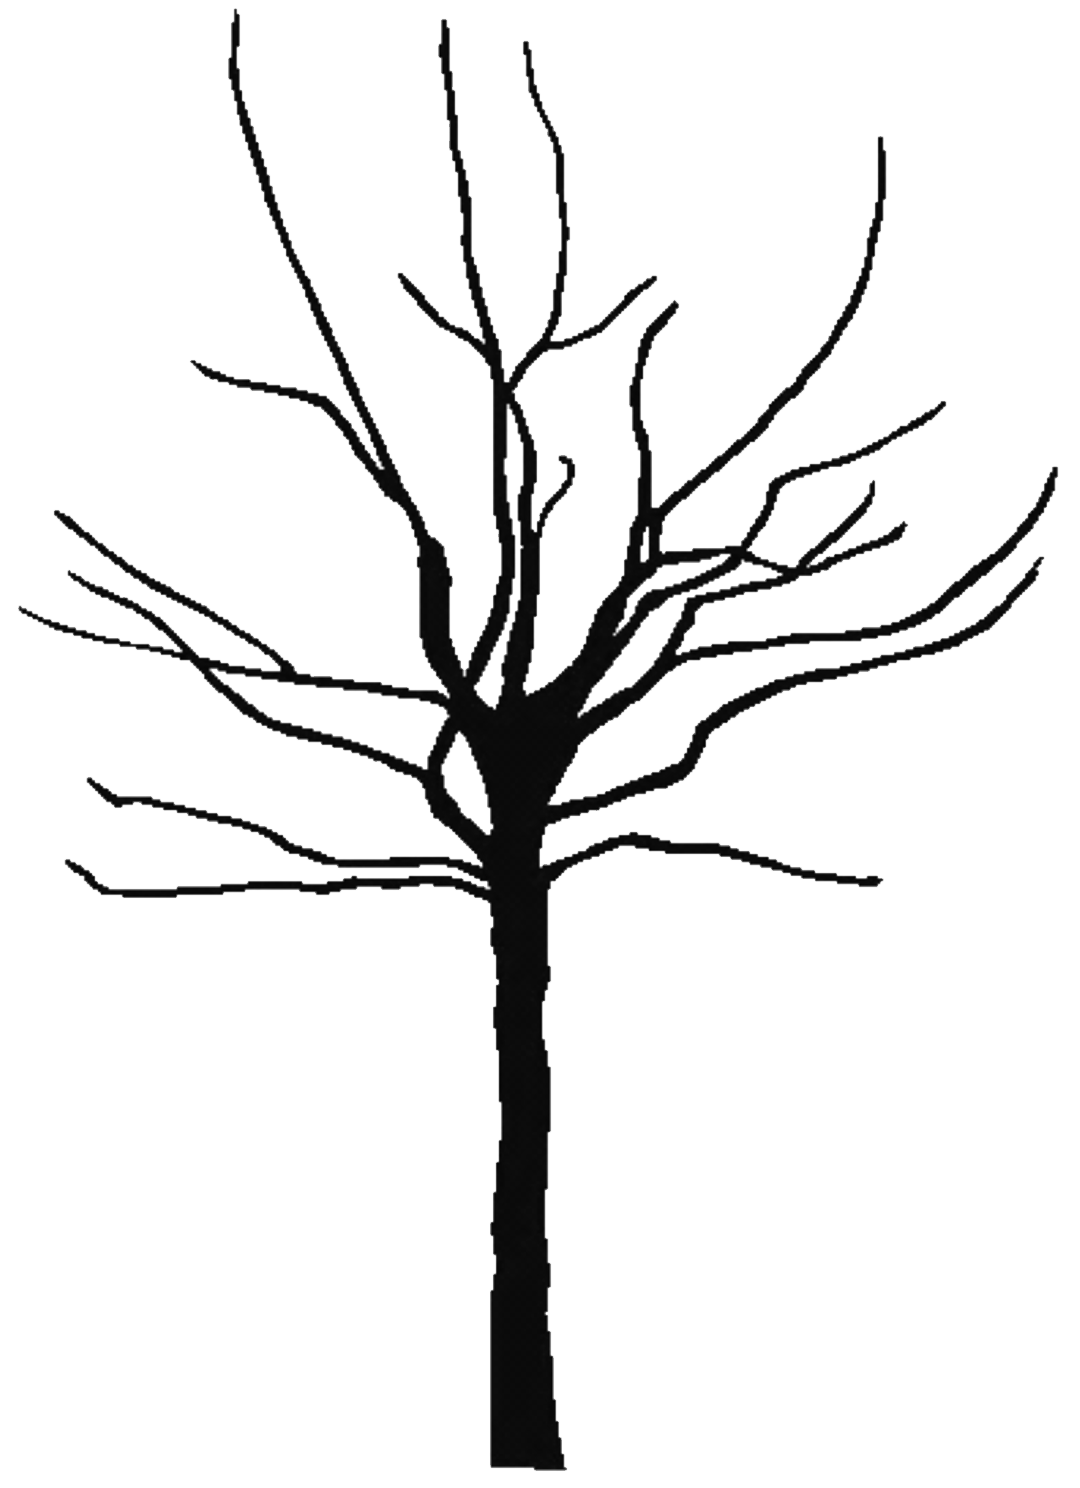 A Crafty Nutter: Free Image of a Bare Tree